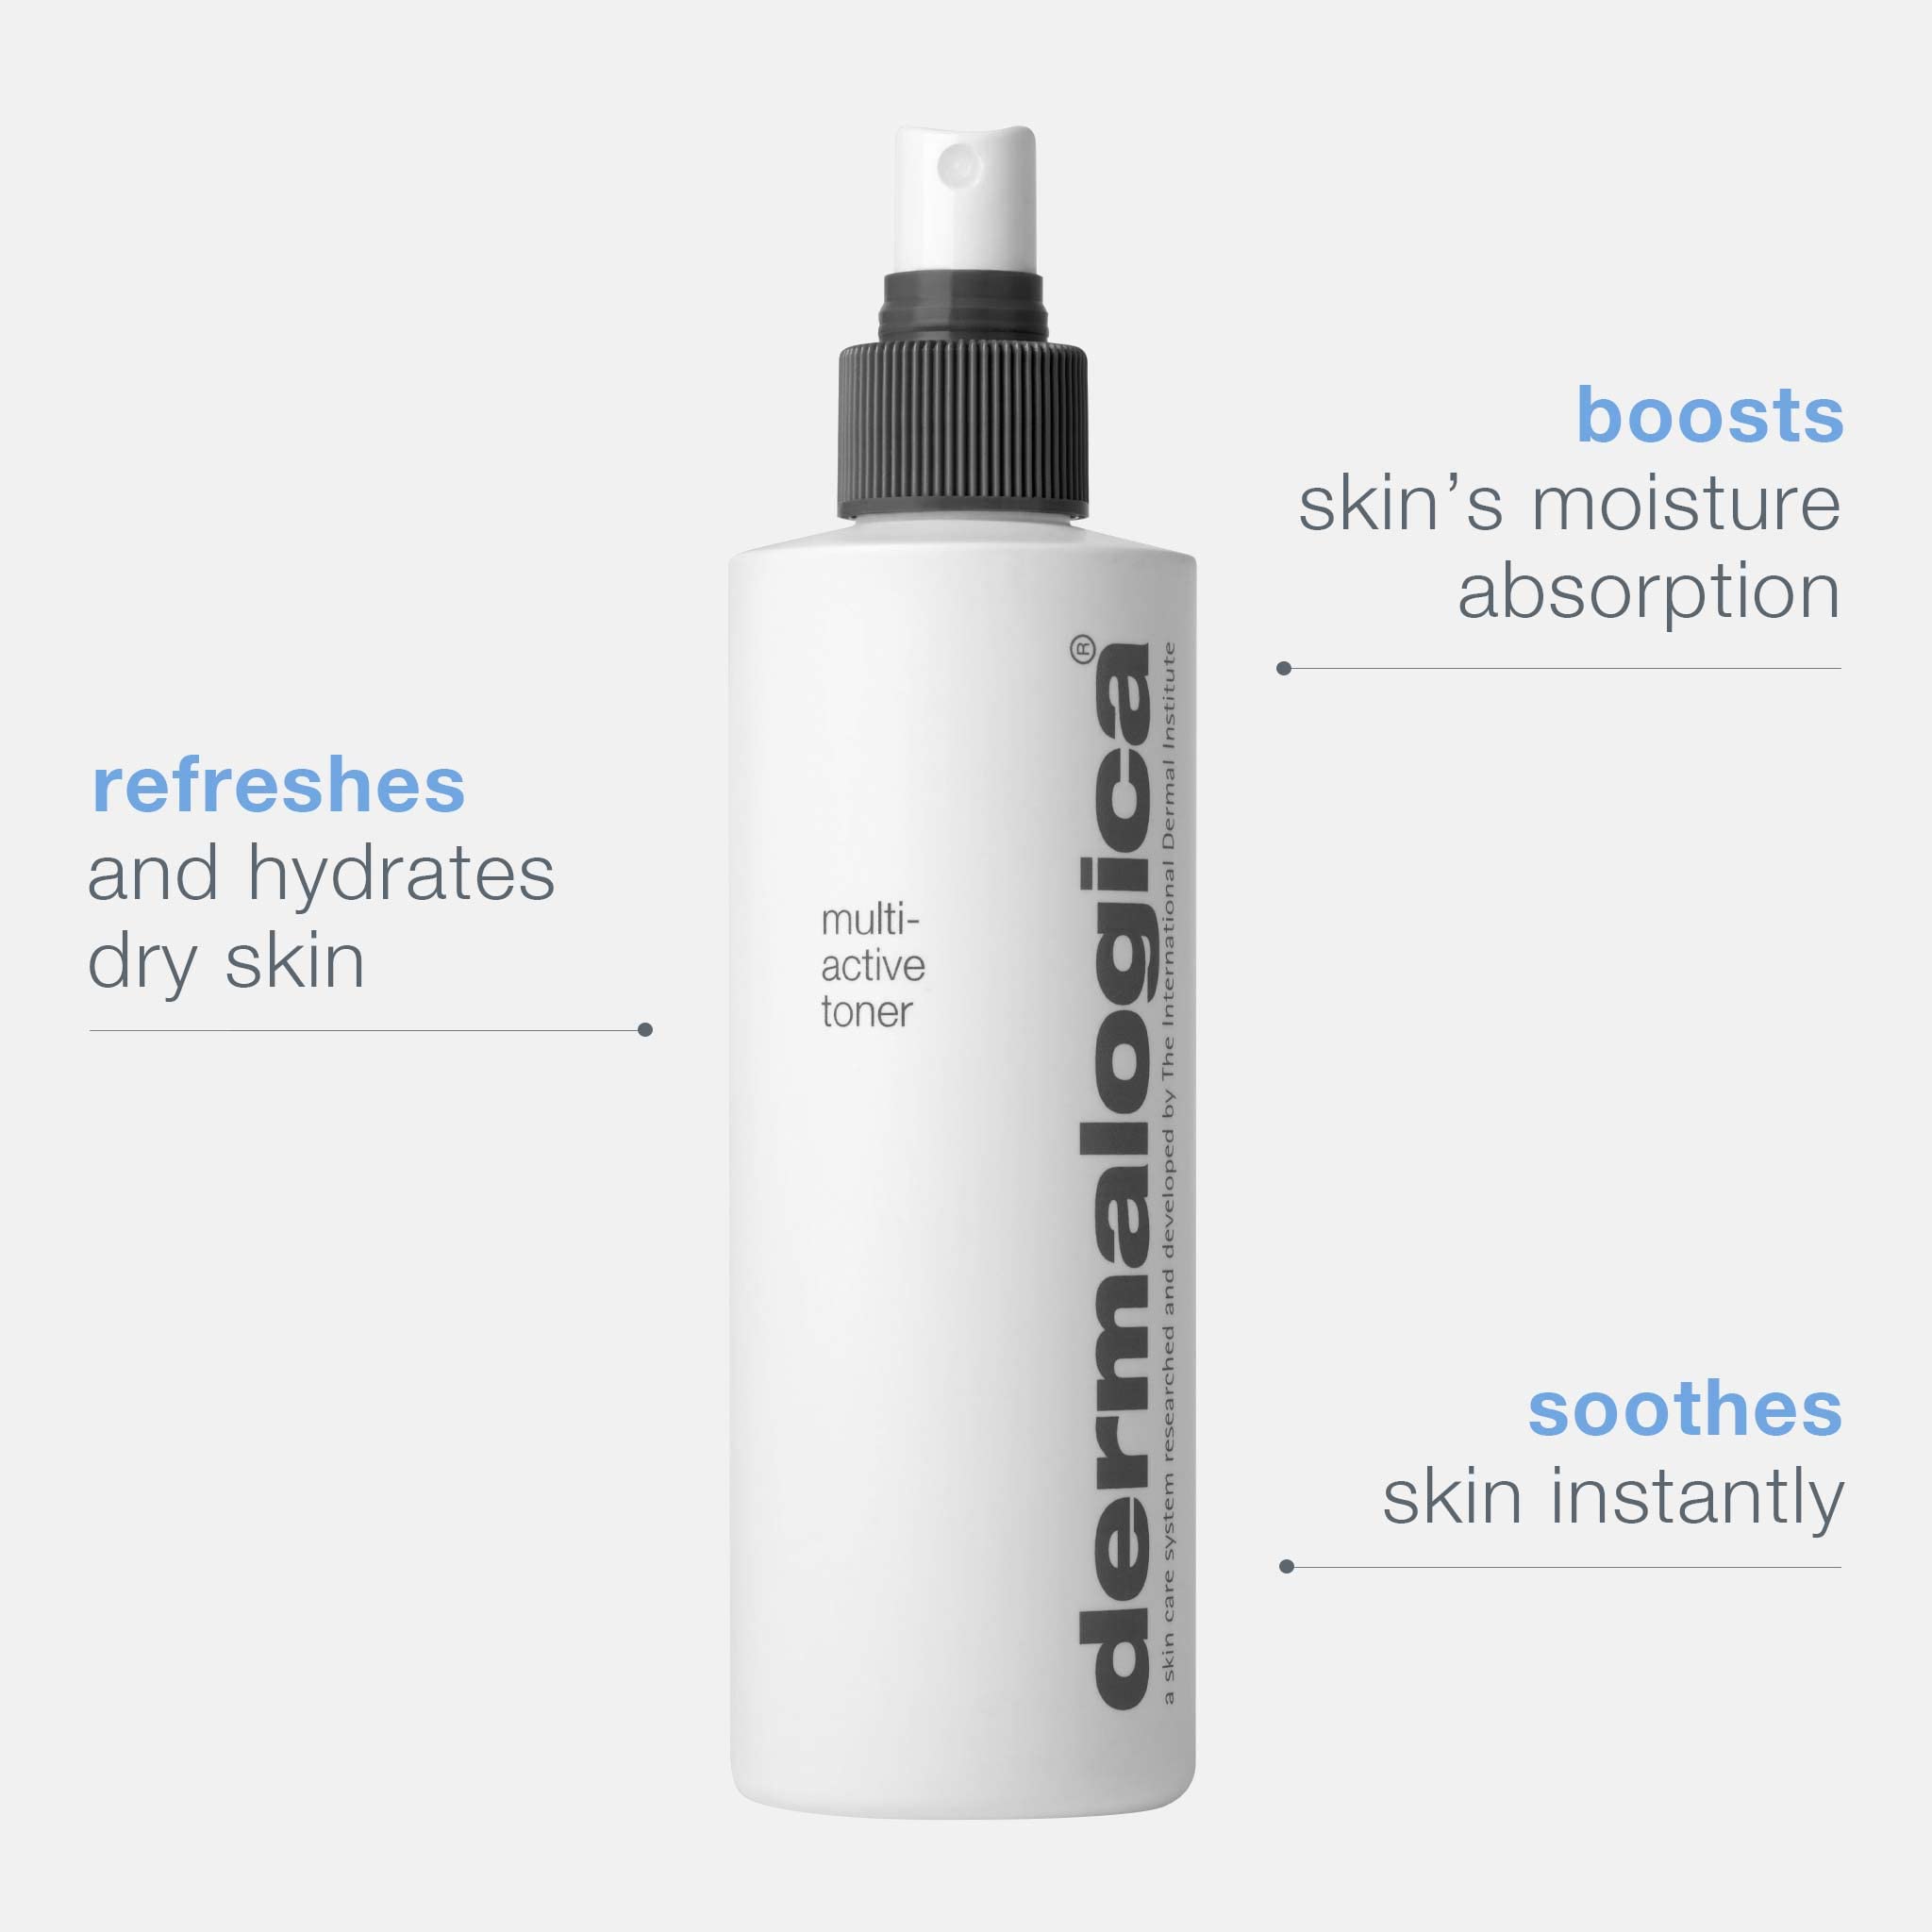 Dermalogica Multi-Active Toner - Hydrating Facial Toner Spray - Help Condition Skin and Prepare For Moisture Absorption